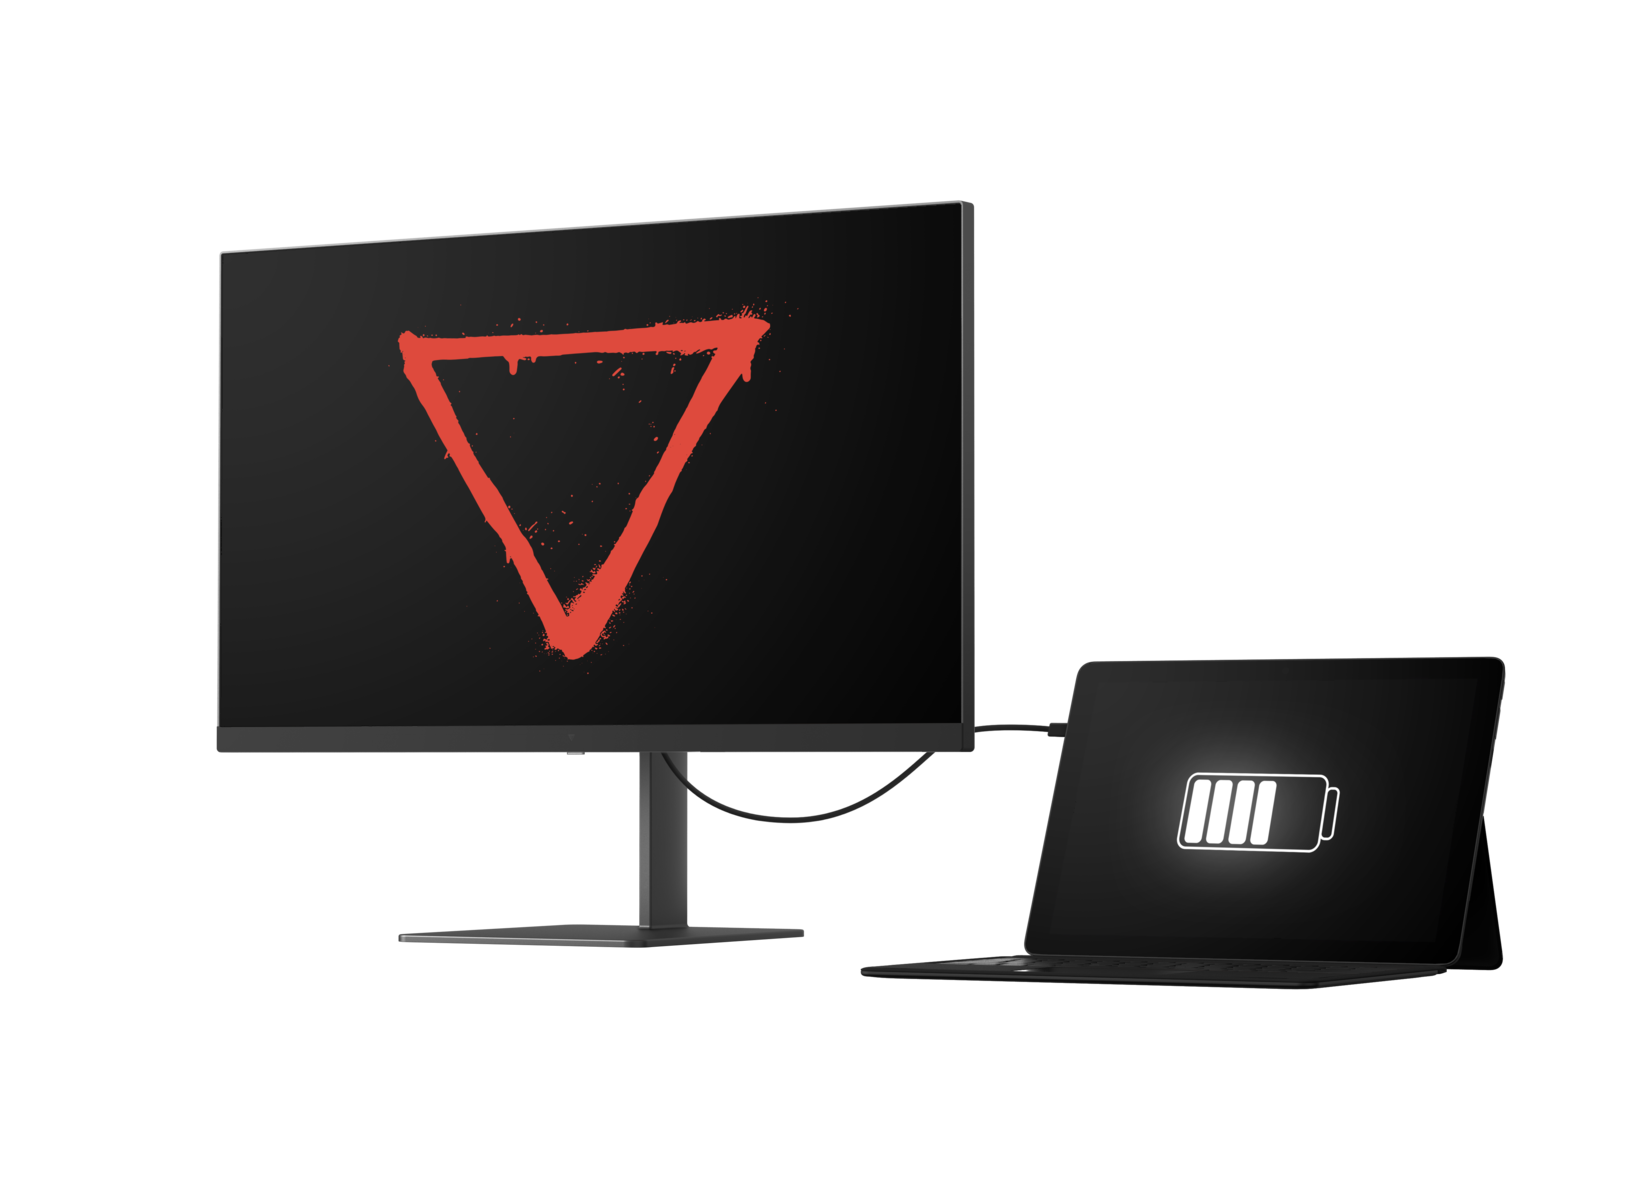 Eve announces Spectrum, the world's first 1440p 240 Hz IPS gaming